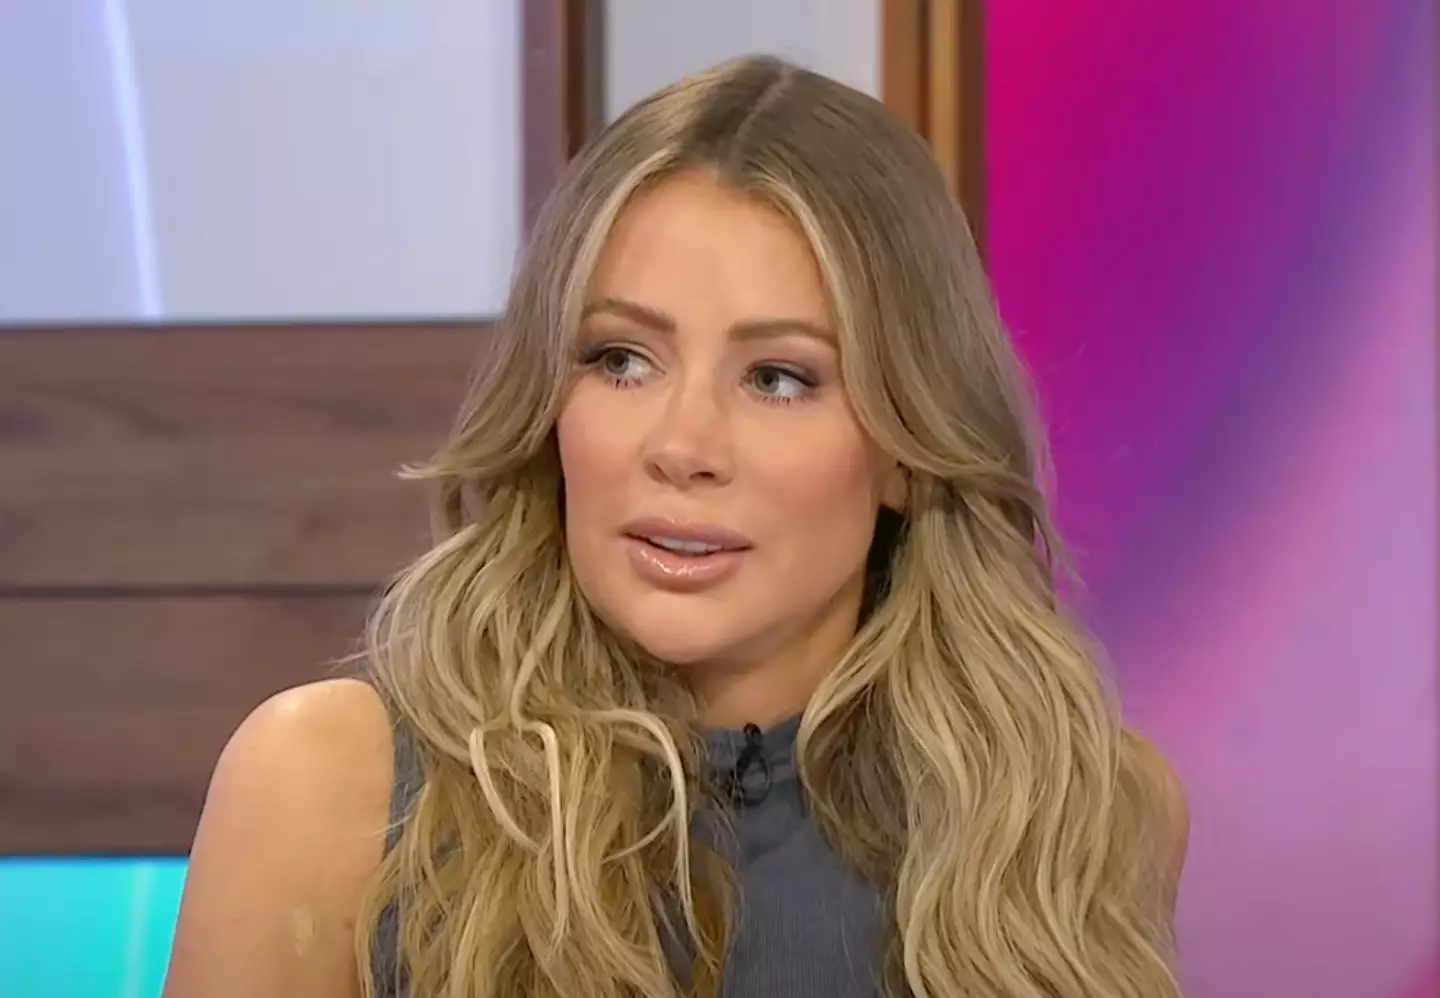 Olivia's Loose Women co-stars gave him a grilling.